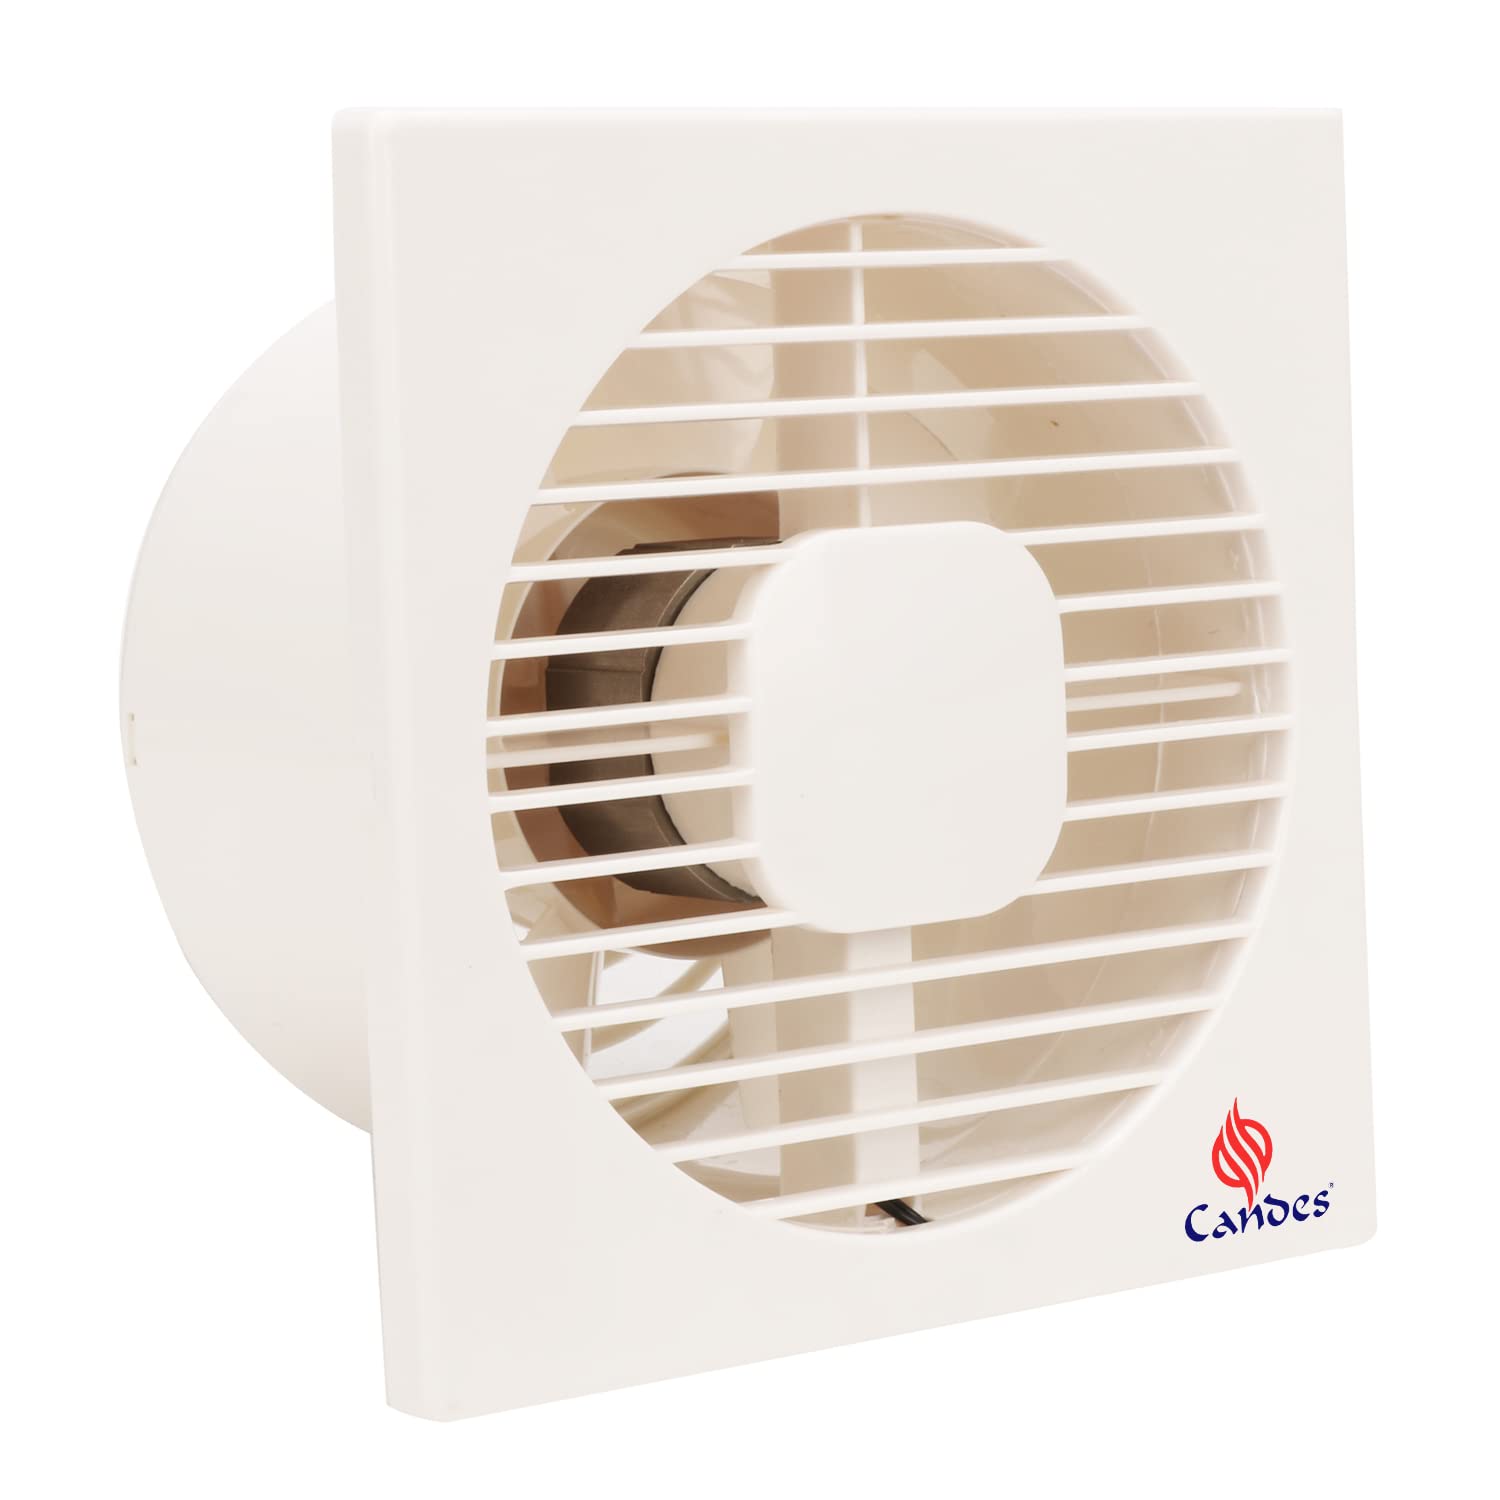 Candes Vento 200 MM (8 Inches) 100% CNC Winding 5 Blade Exhaust Fan - 1 Year Warranty (White)